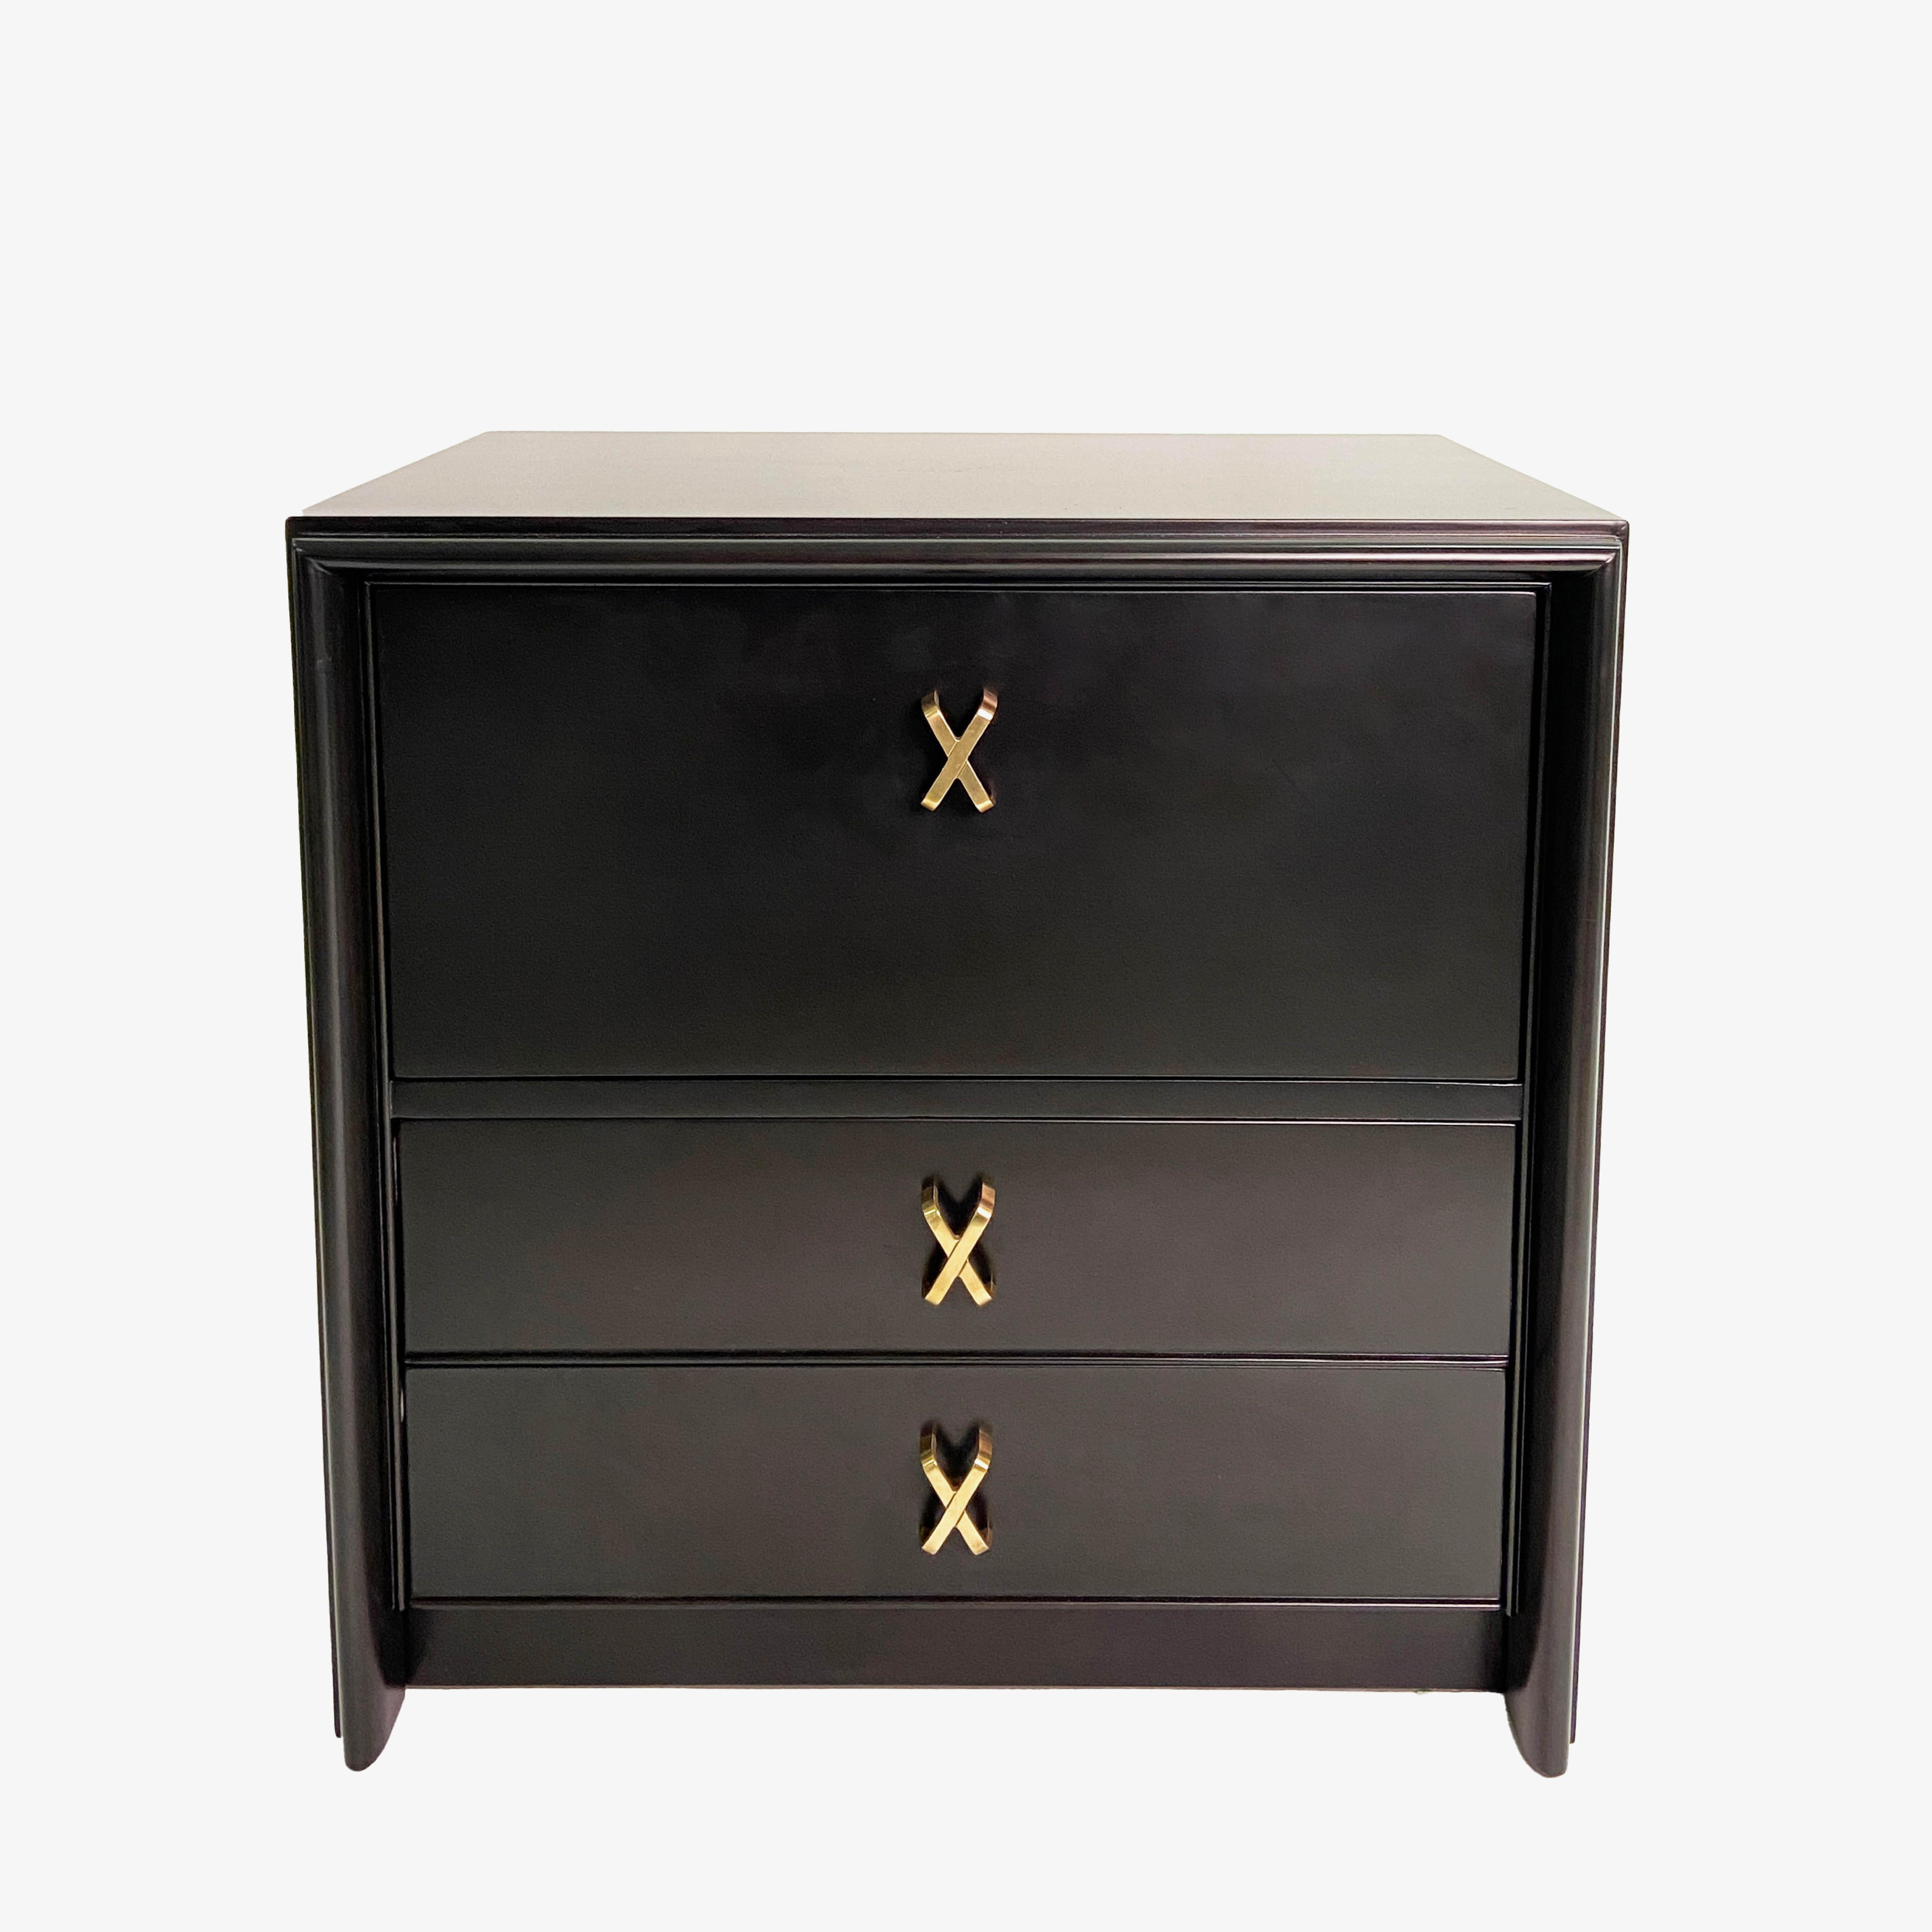 Mid-20th Century Mid-Century Modern Paul Frankl Nightstands Lacquered in Ebony, Pair For Sale